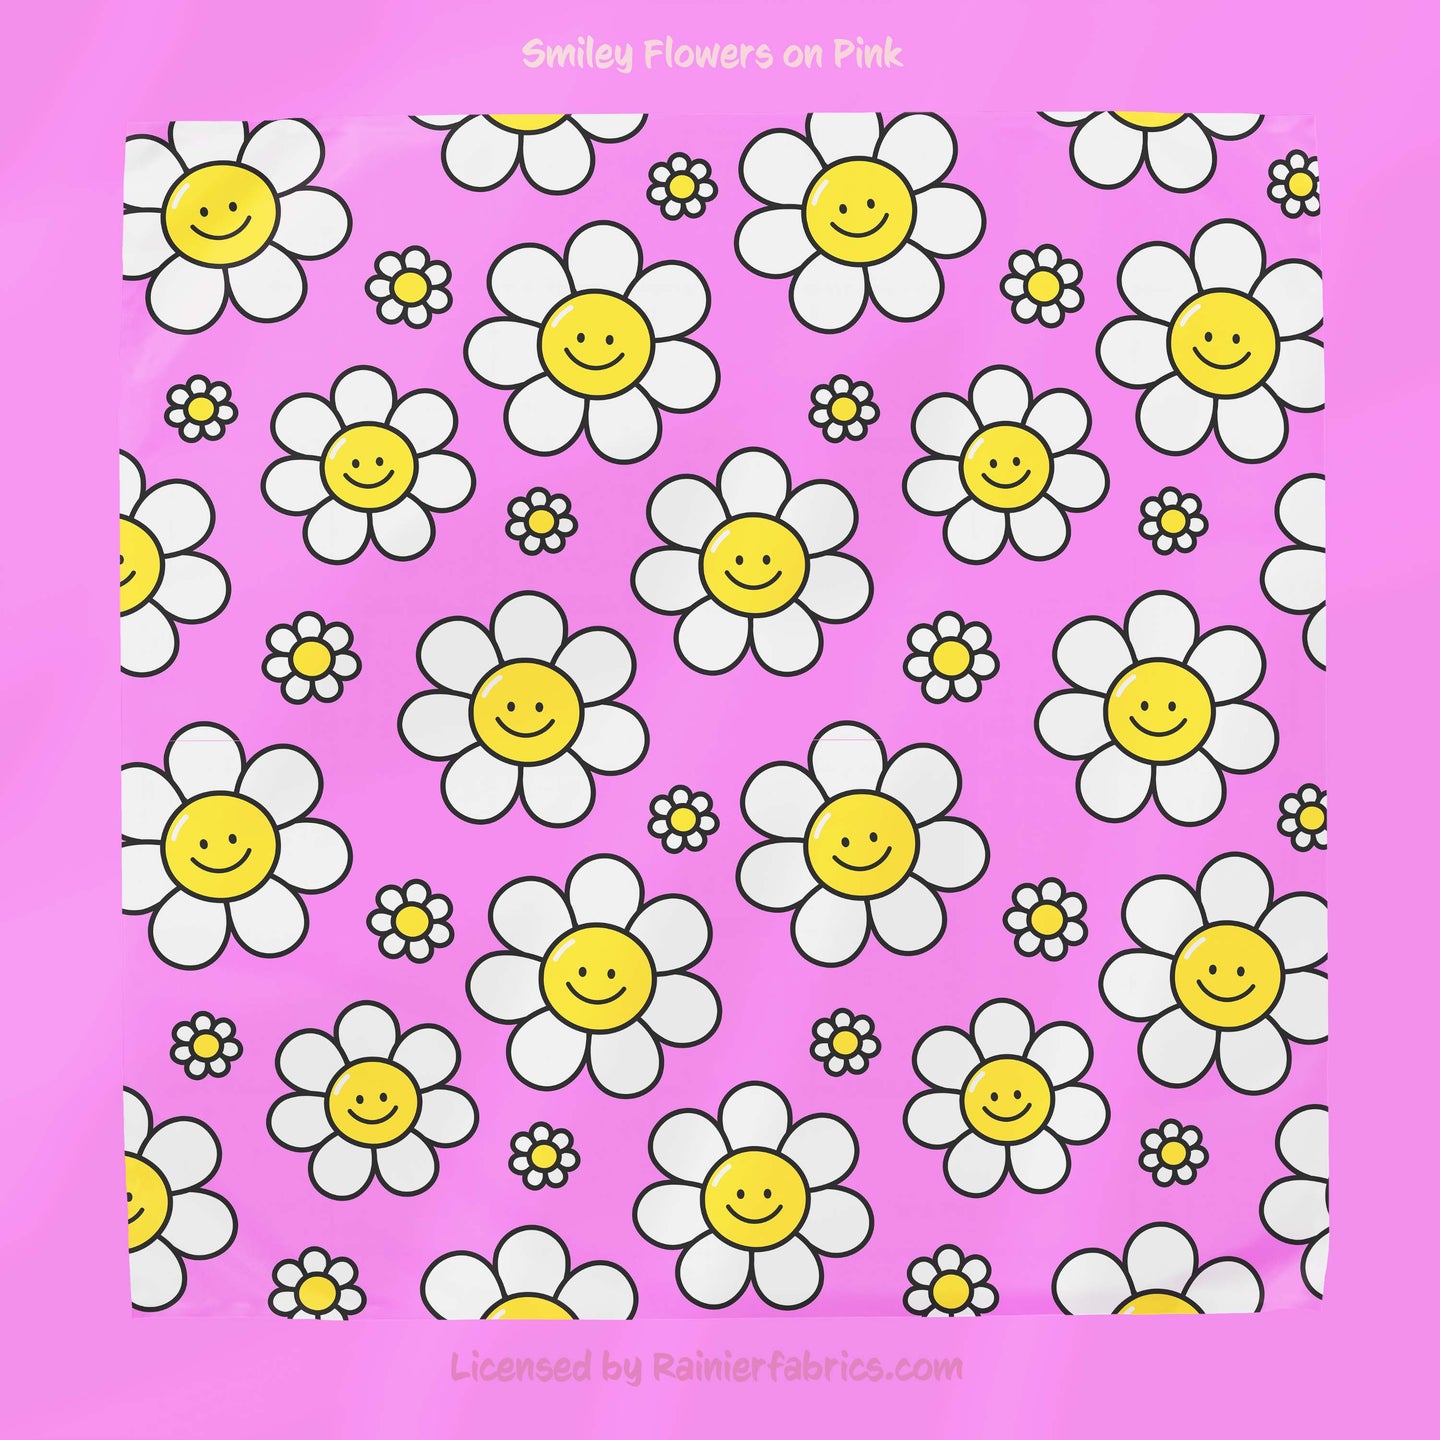 Smiley flowers on Blue or Pink - 2-5 day turnaround - Order by 1/2 yard; Description of bases below